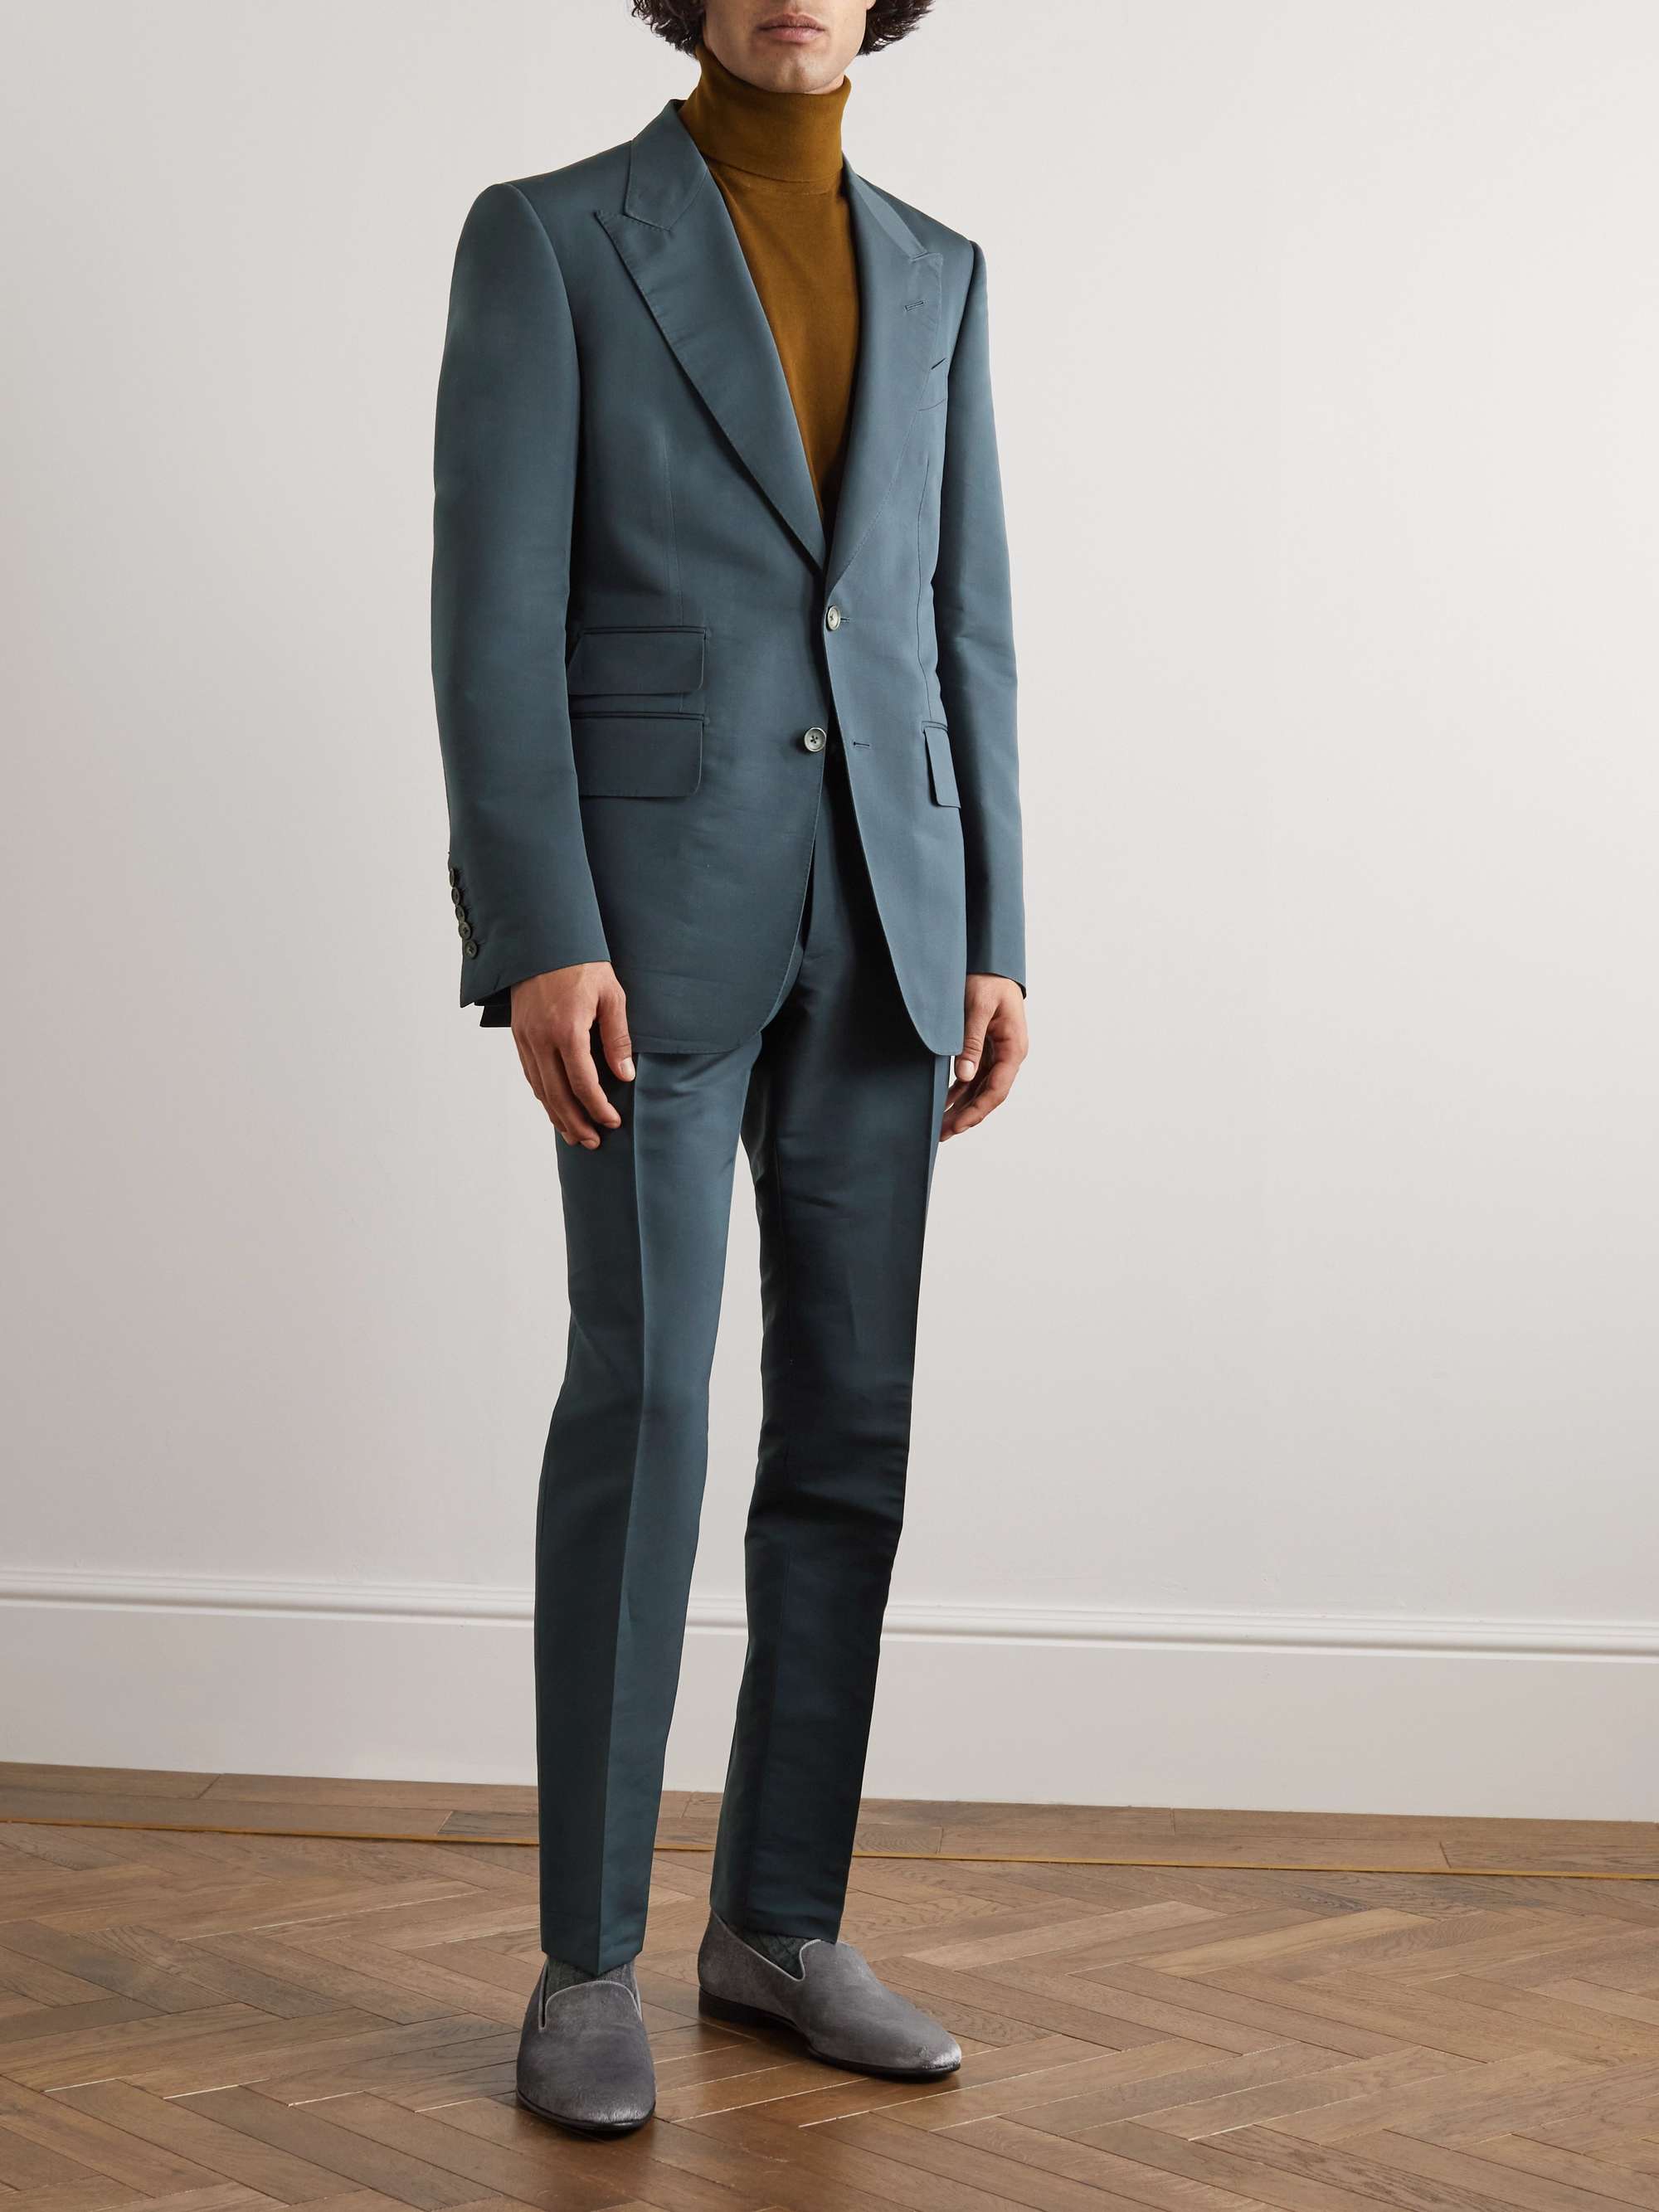 TOM FORD Shelton Cotton and Silk-Blend Suit Jacket